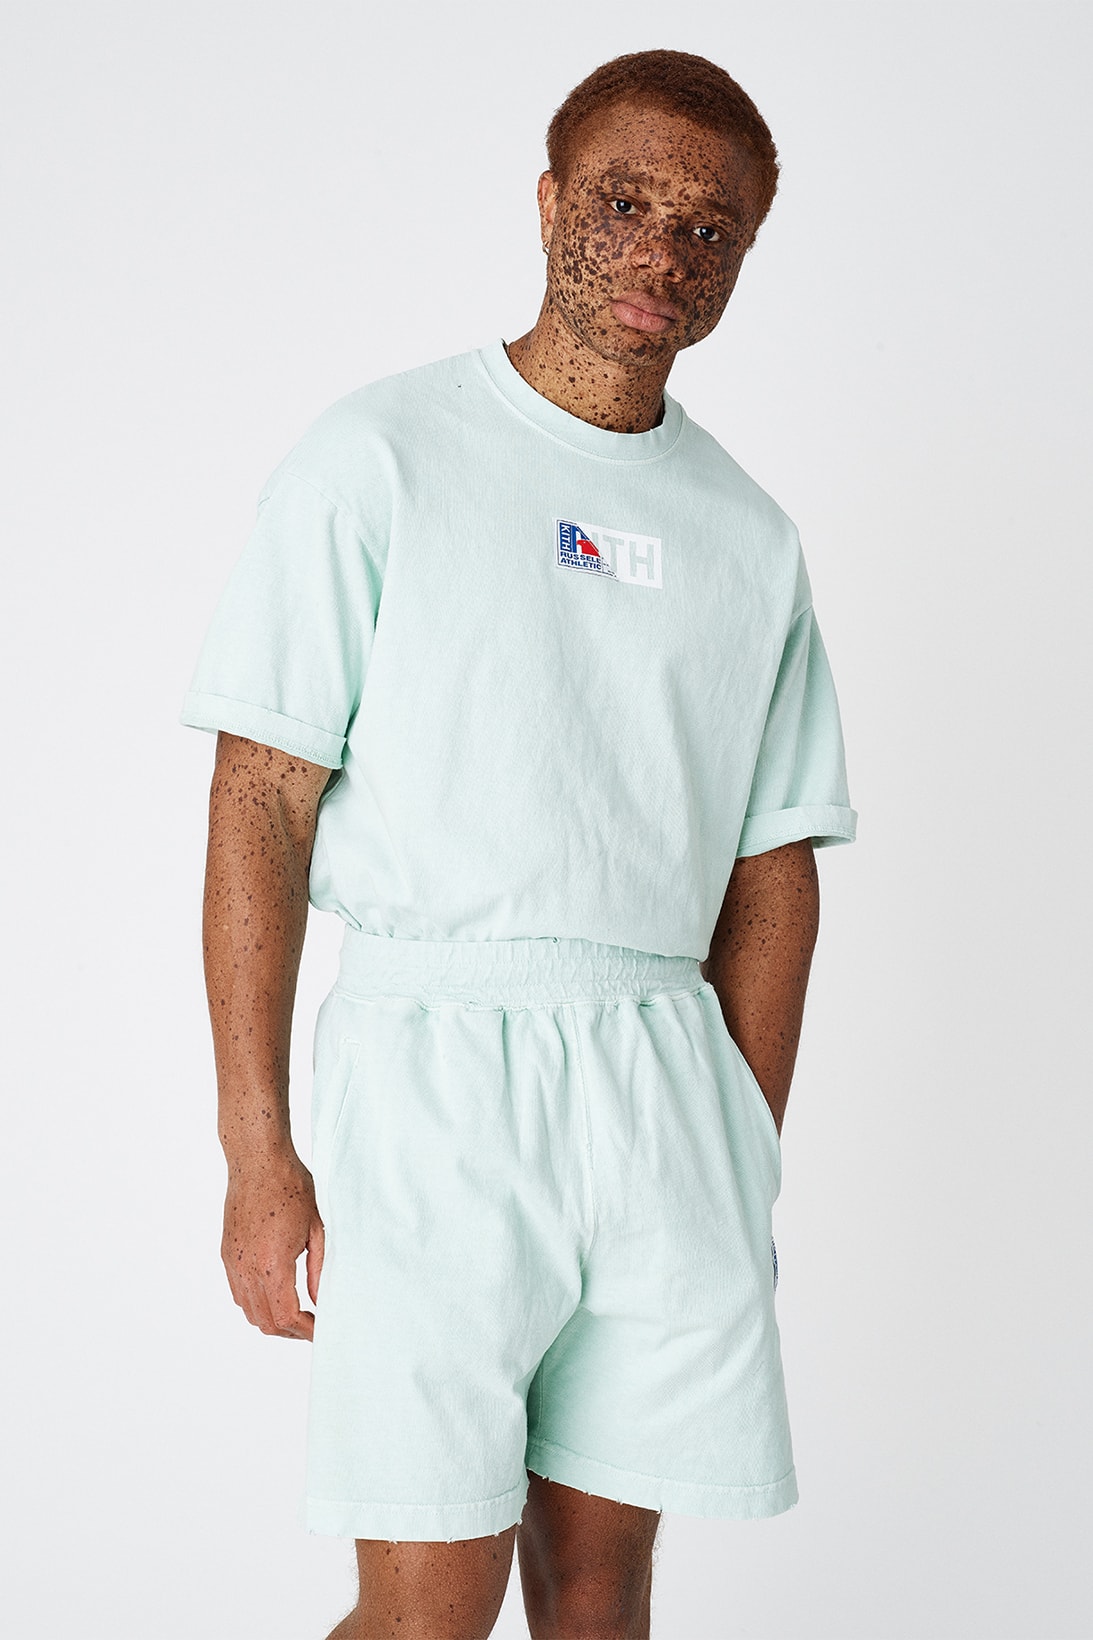 KITH Russell Athletic Unisex Collaboration Pastel Graphic T-Shirt Hoodie Sweatshirt Shorts Ronnie Fieg